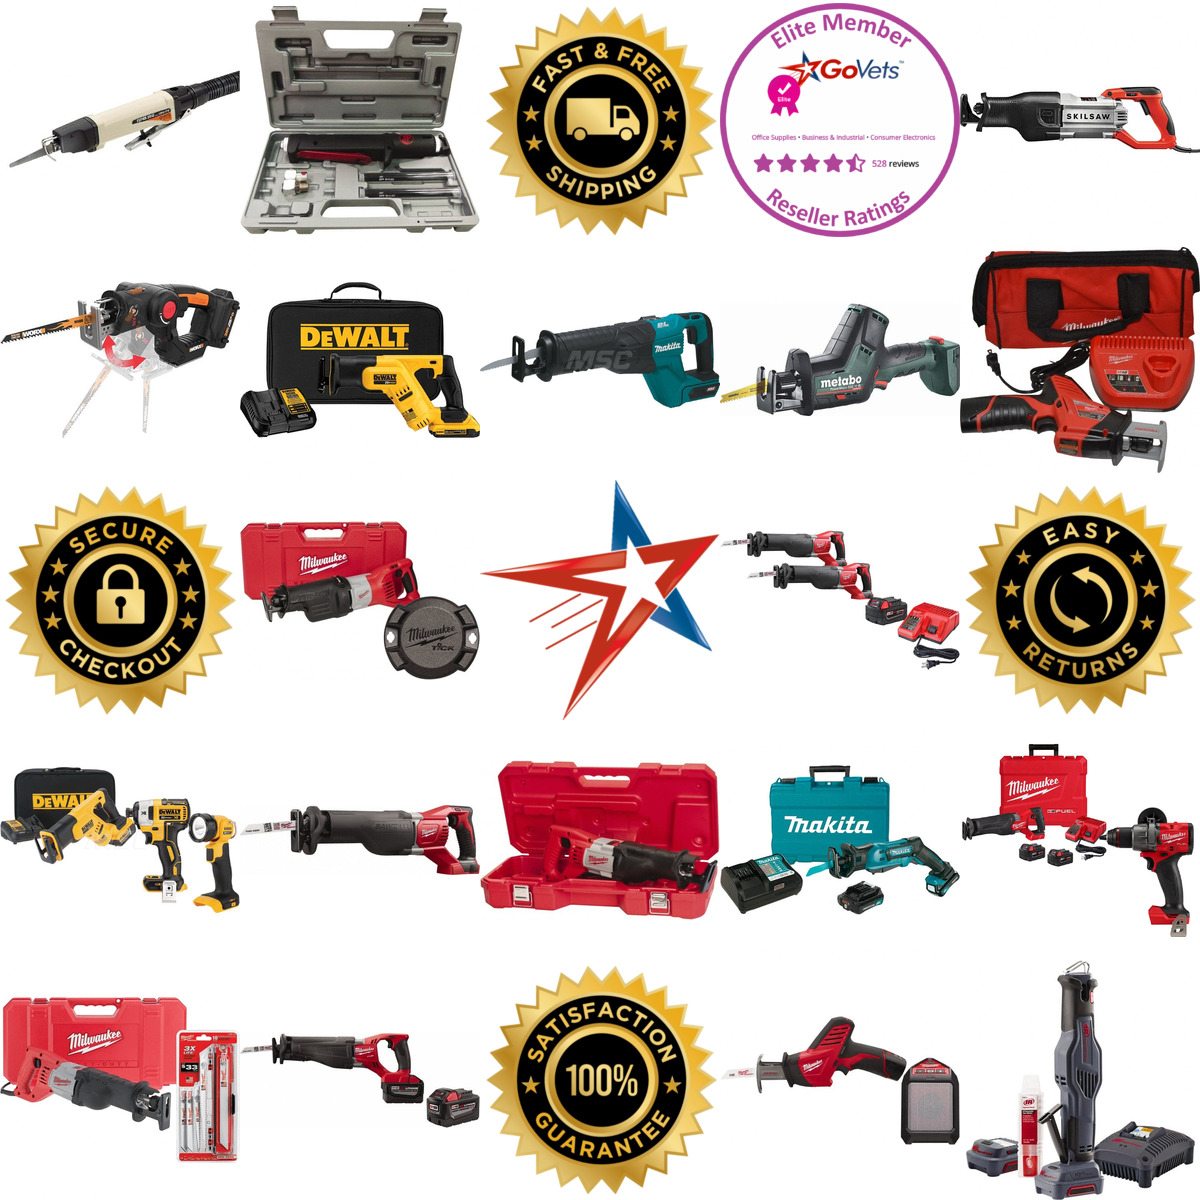 A selection of Reciprocating Saws products on GoVets